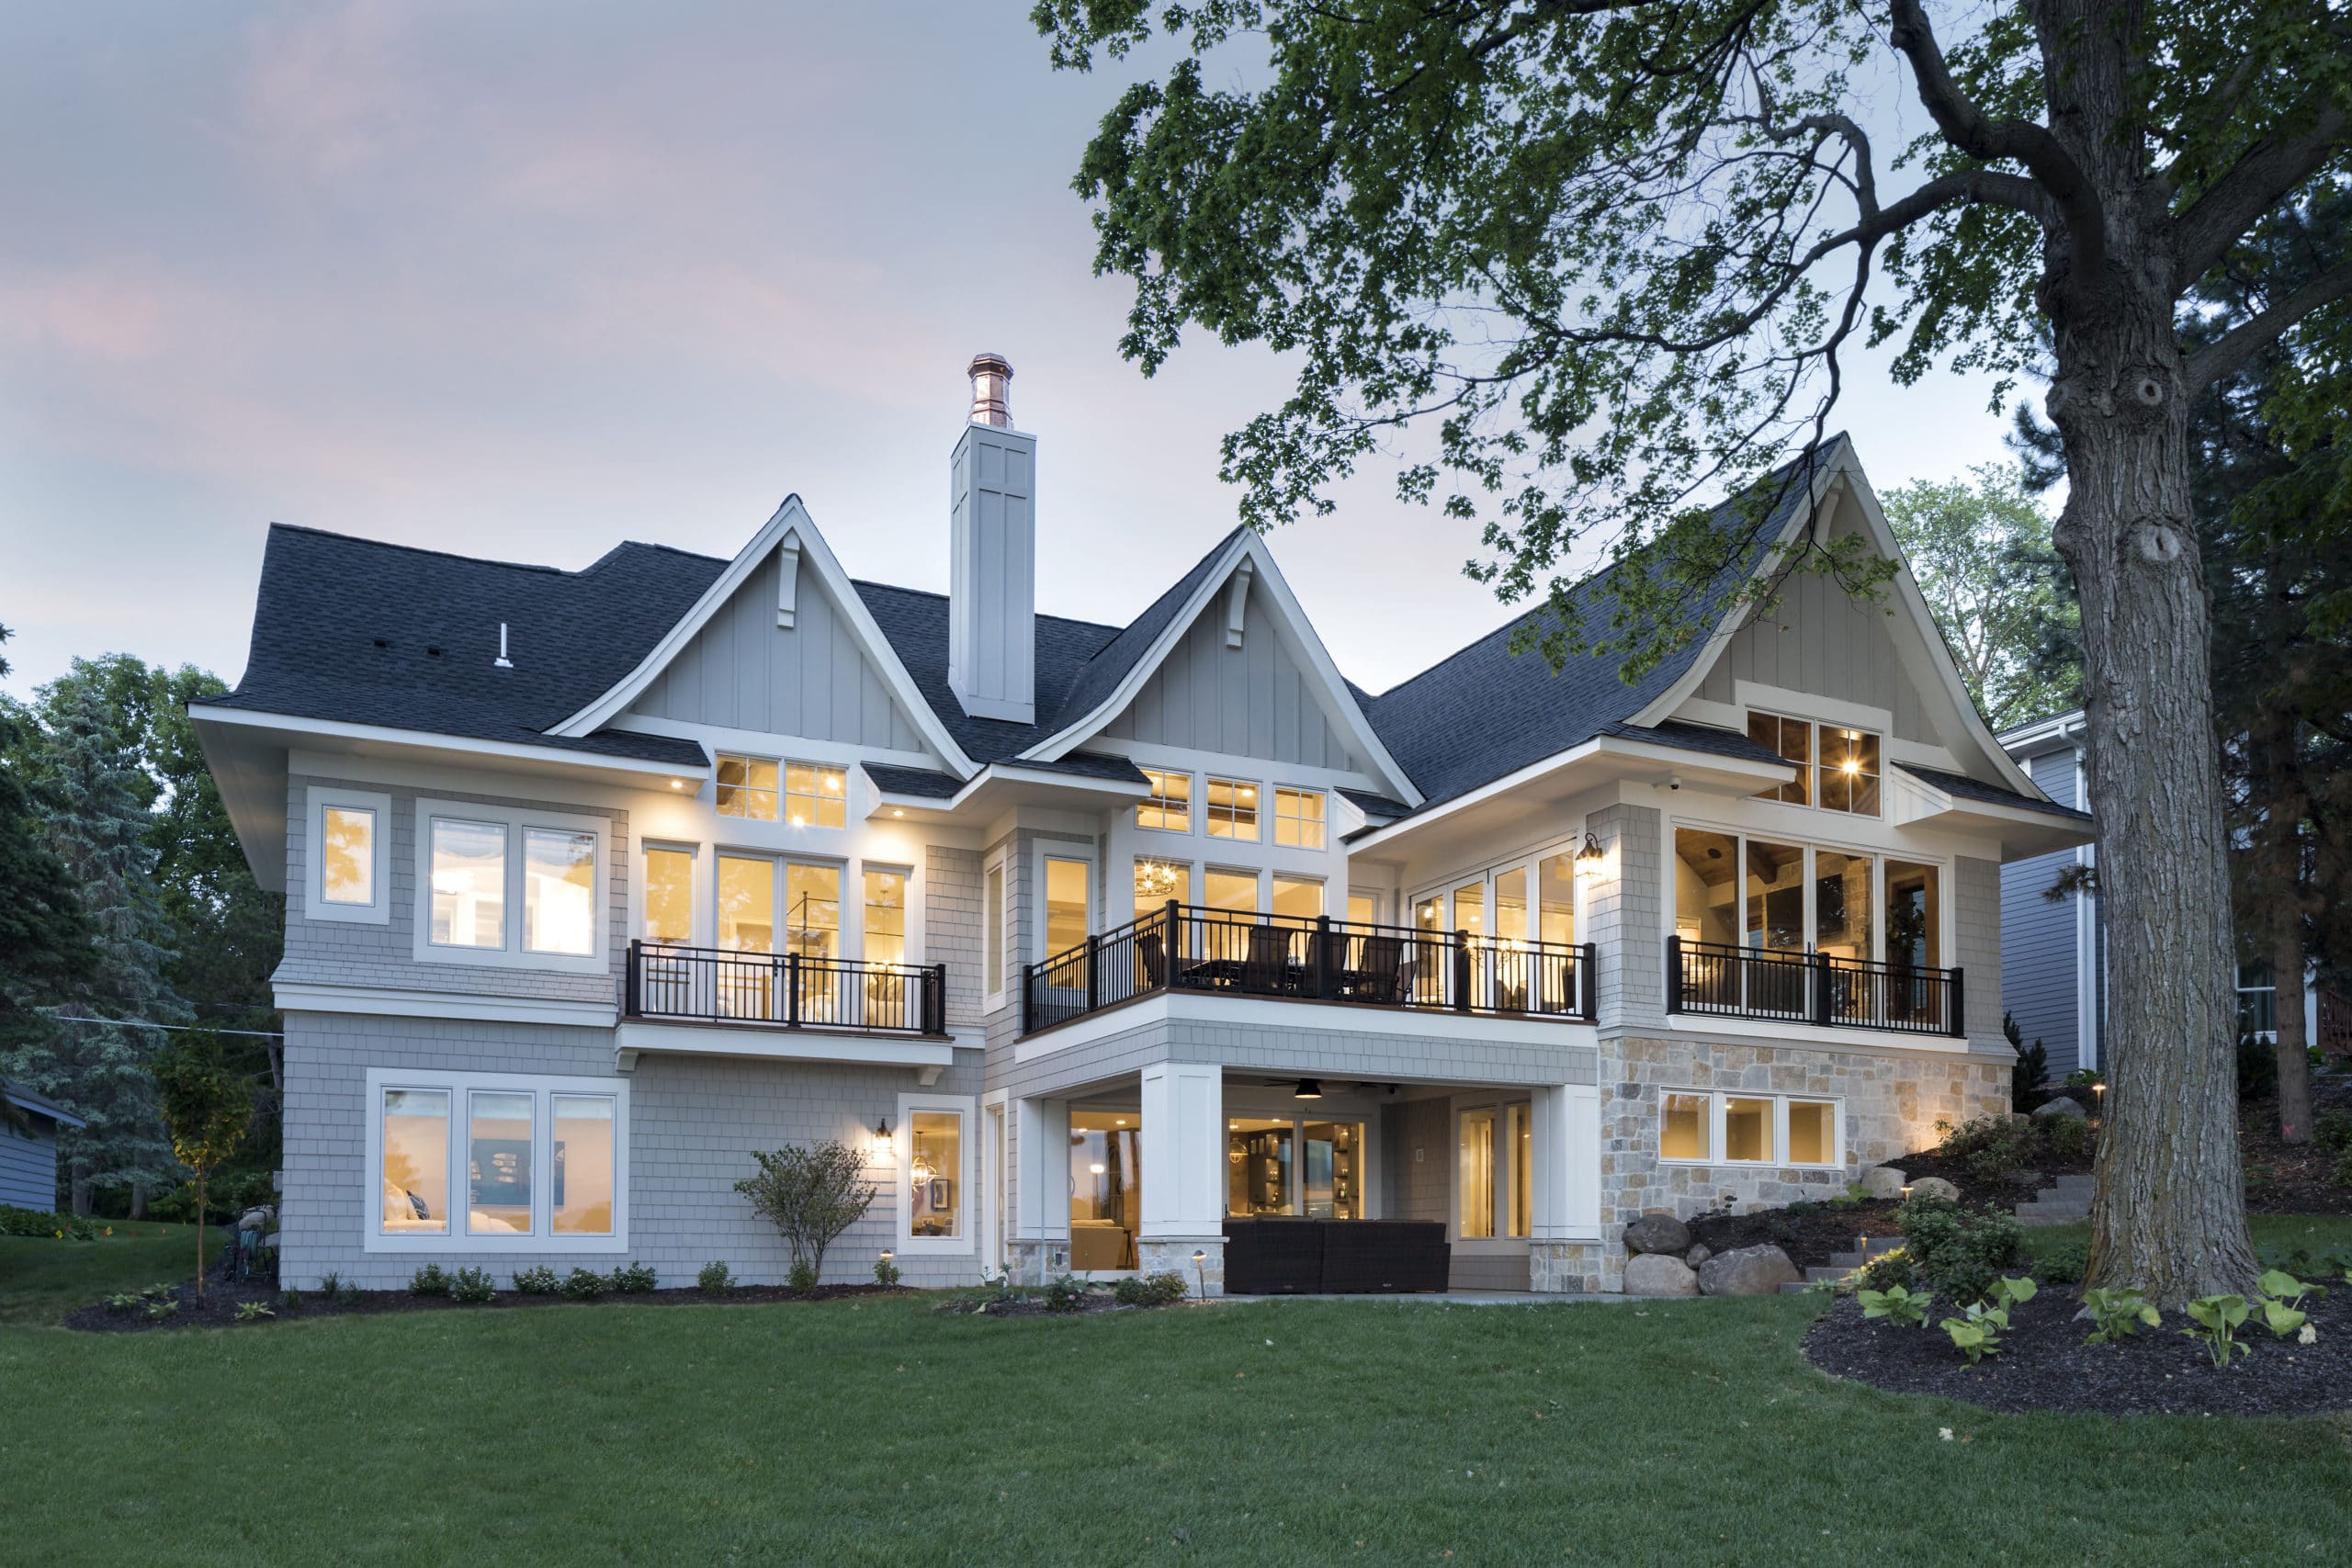 A luxury custom home build by Gordon James in Minnetonka and outfitted with smart home technology by ResTech systems.